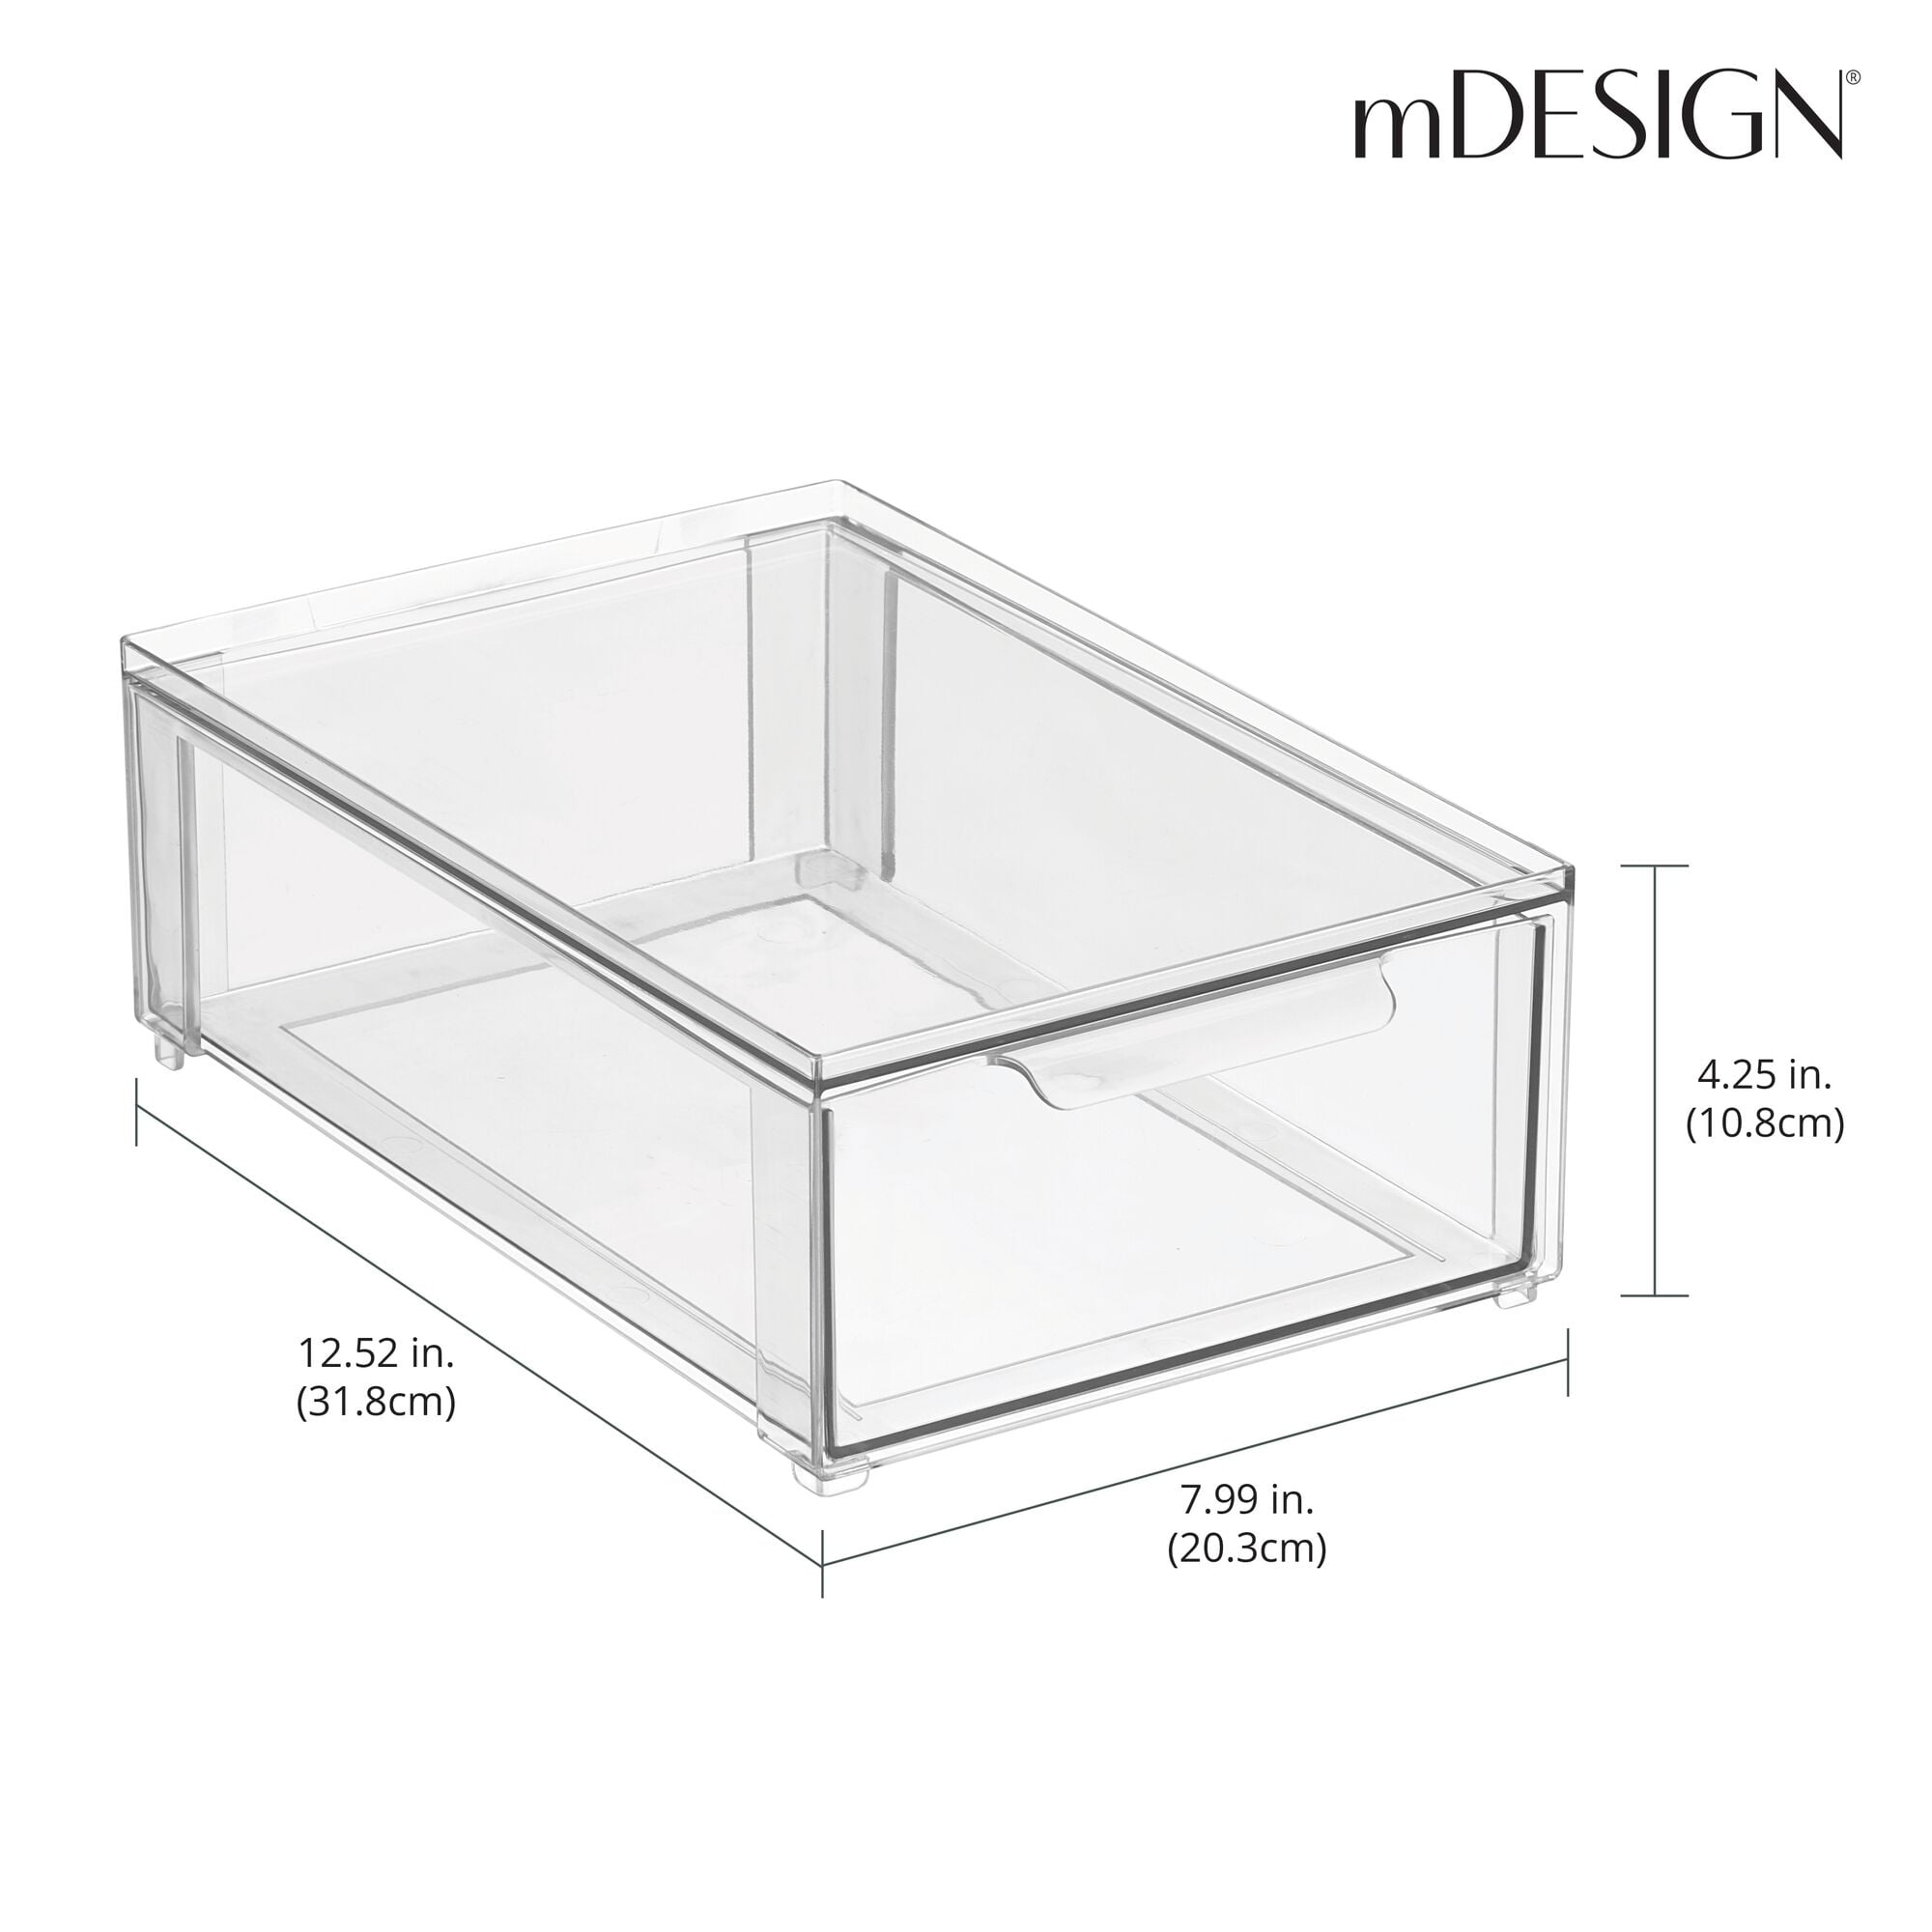 mDesign mdesign stackable storage containers box with 2 pull-out drawers -  stacking plastic drawer bins for master or guest bathroom